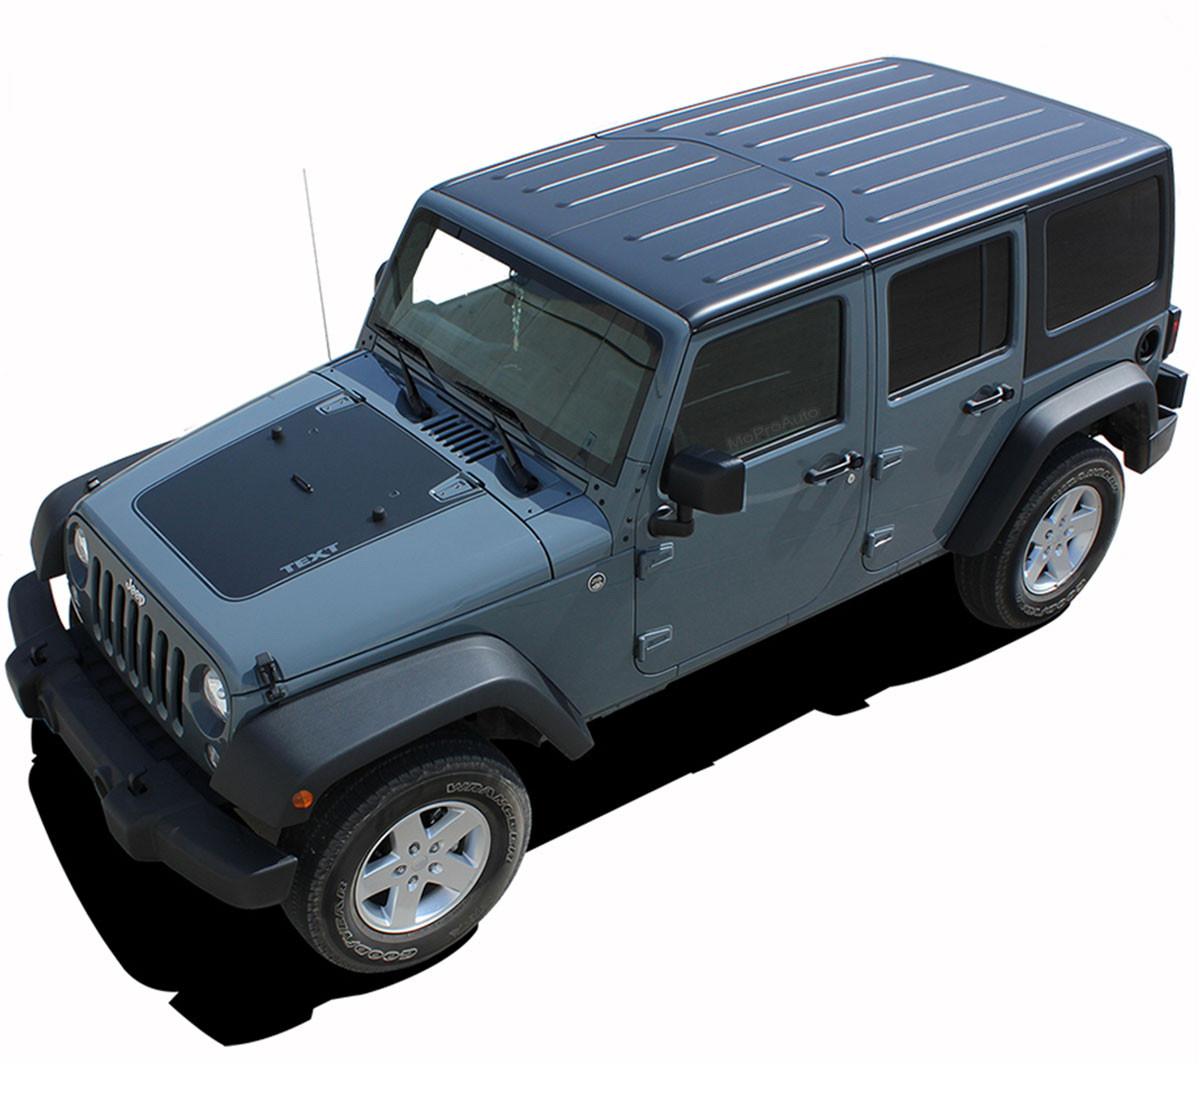 OUTFITTER : Jeep Wrangler Hood Vinyl Graphics Decal Stripe Kit for 2007  2008 2009 2010 2011 2012 2013 2014 2015 2016 2017 Models - MoProAuto |  Professional Vinyl Graphics and Striping